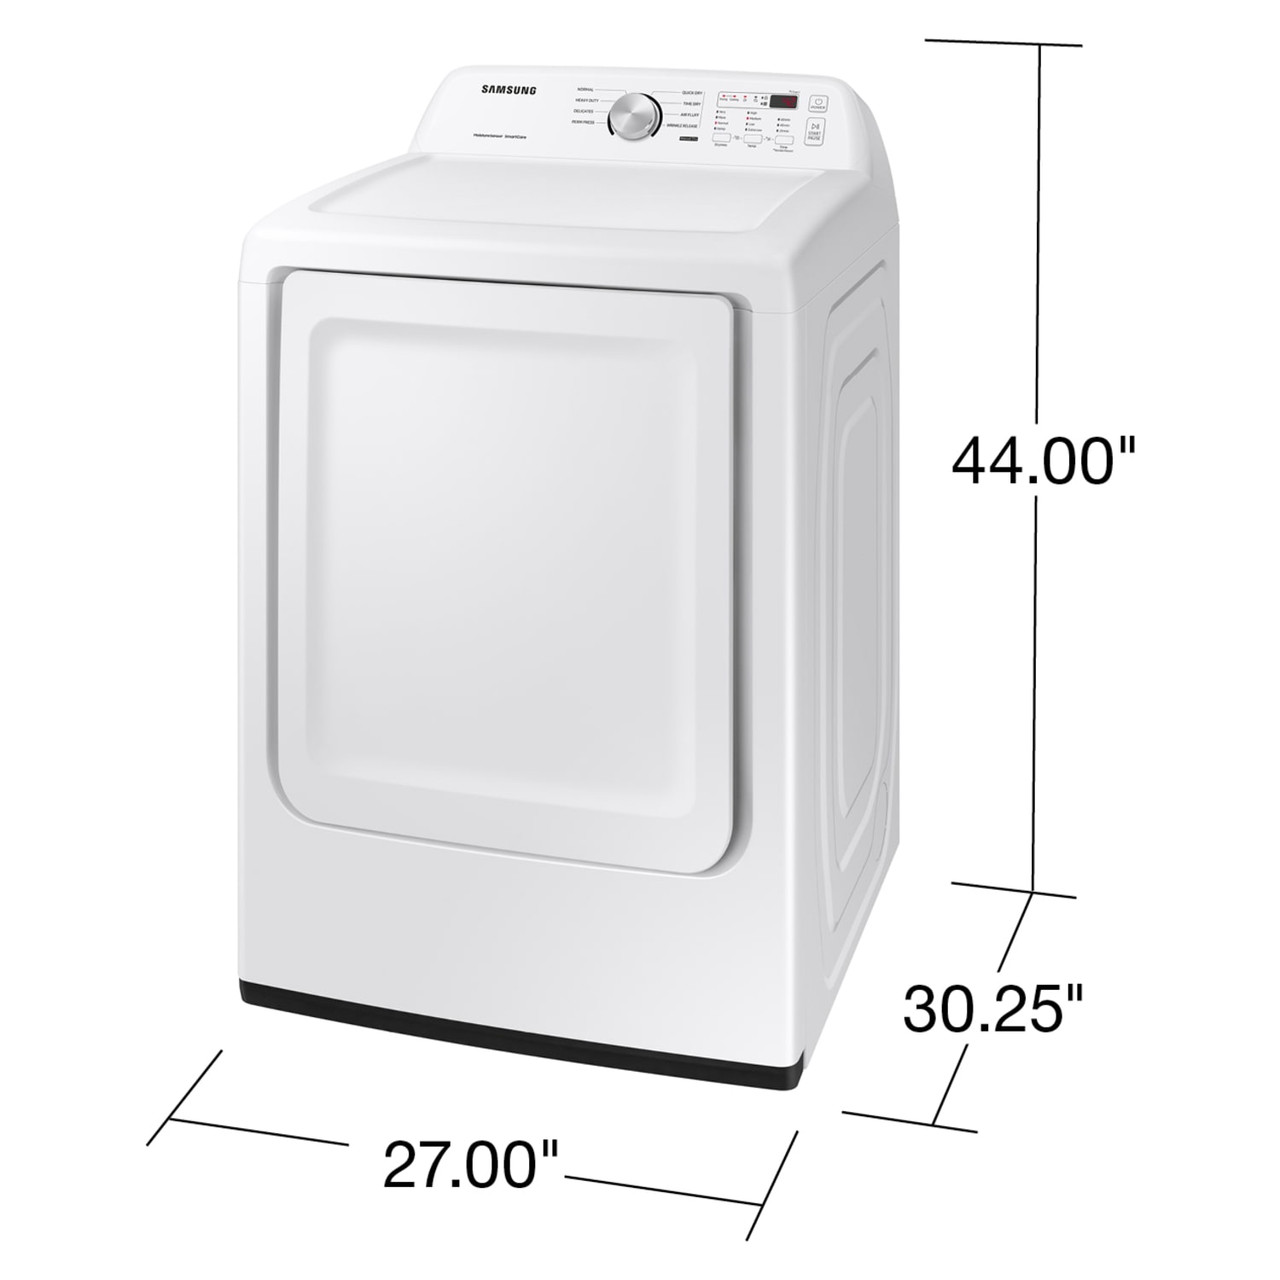 Samsung 7.2 cu. ft. Electric Dryer with Sensor Dry in White